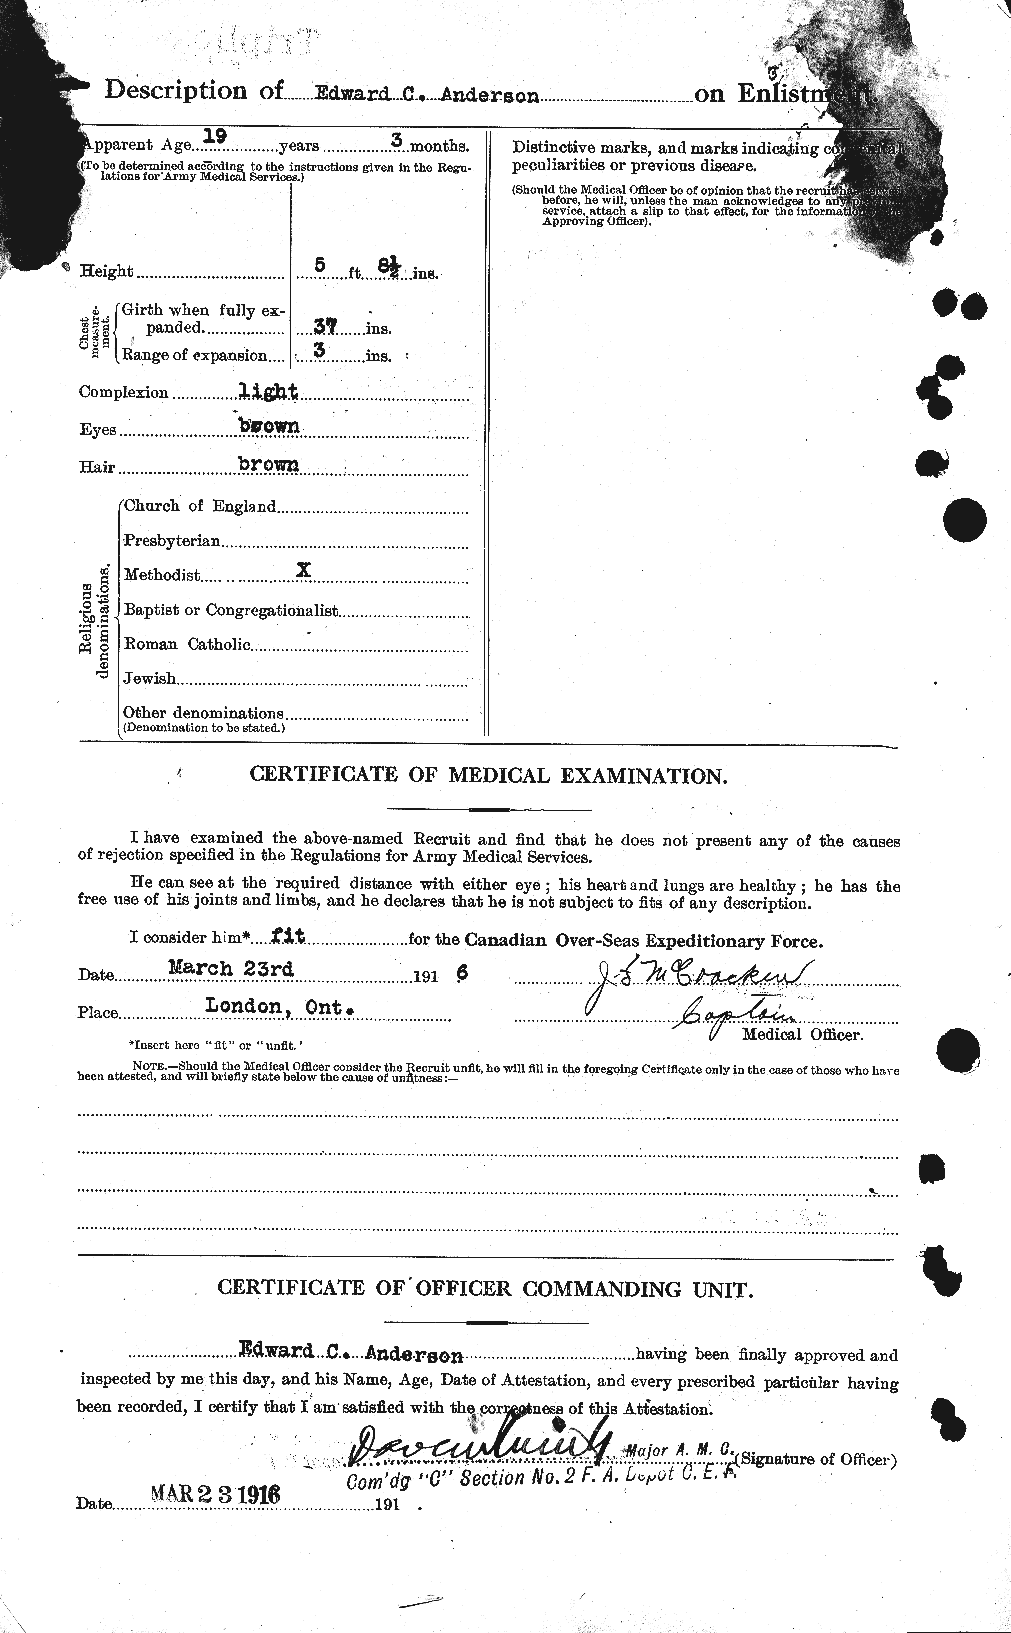 Personnel Records of the First World War - CEF 209938b